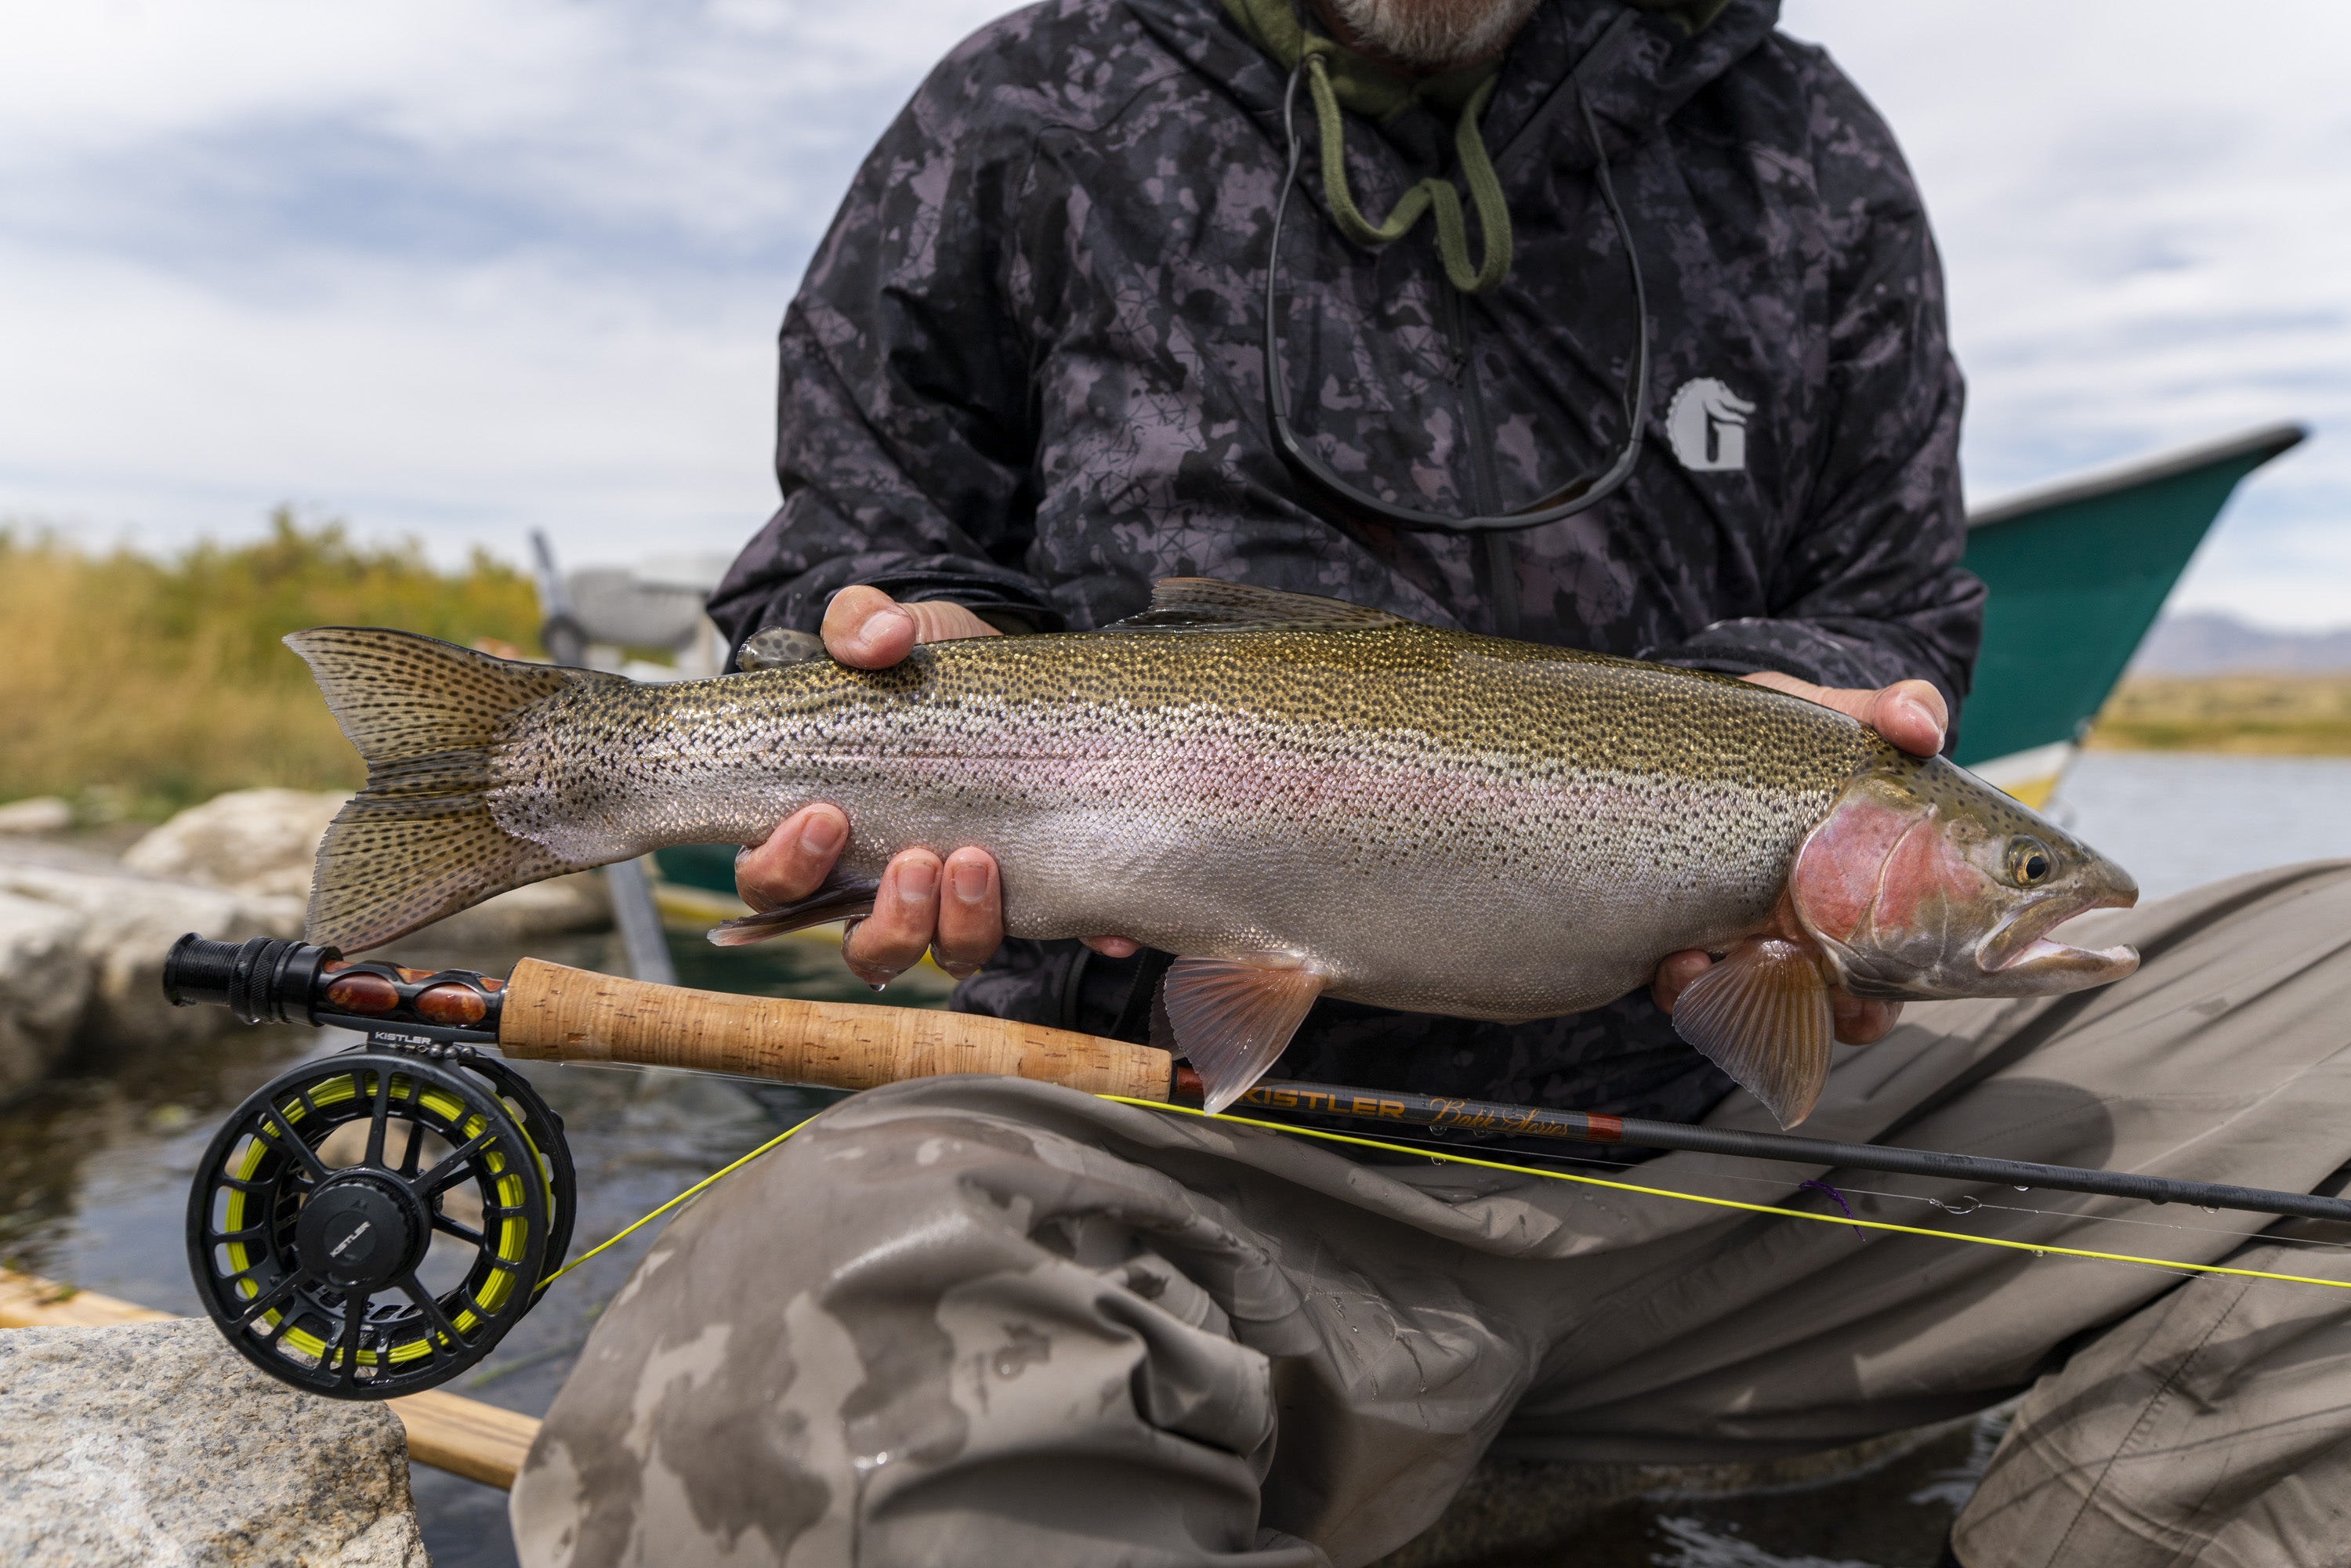 The BAKK Fly Rod and Reel: A Match Made in Fly Fishing Heaven